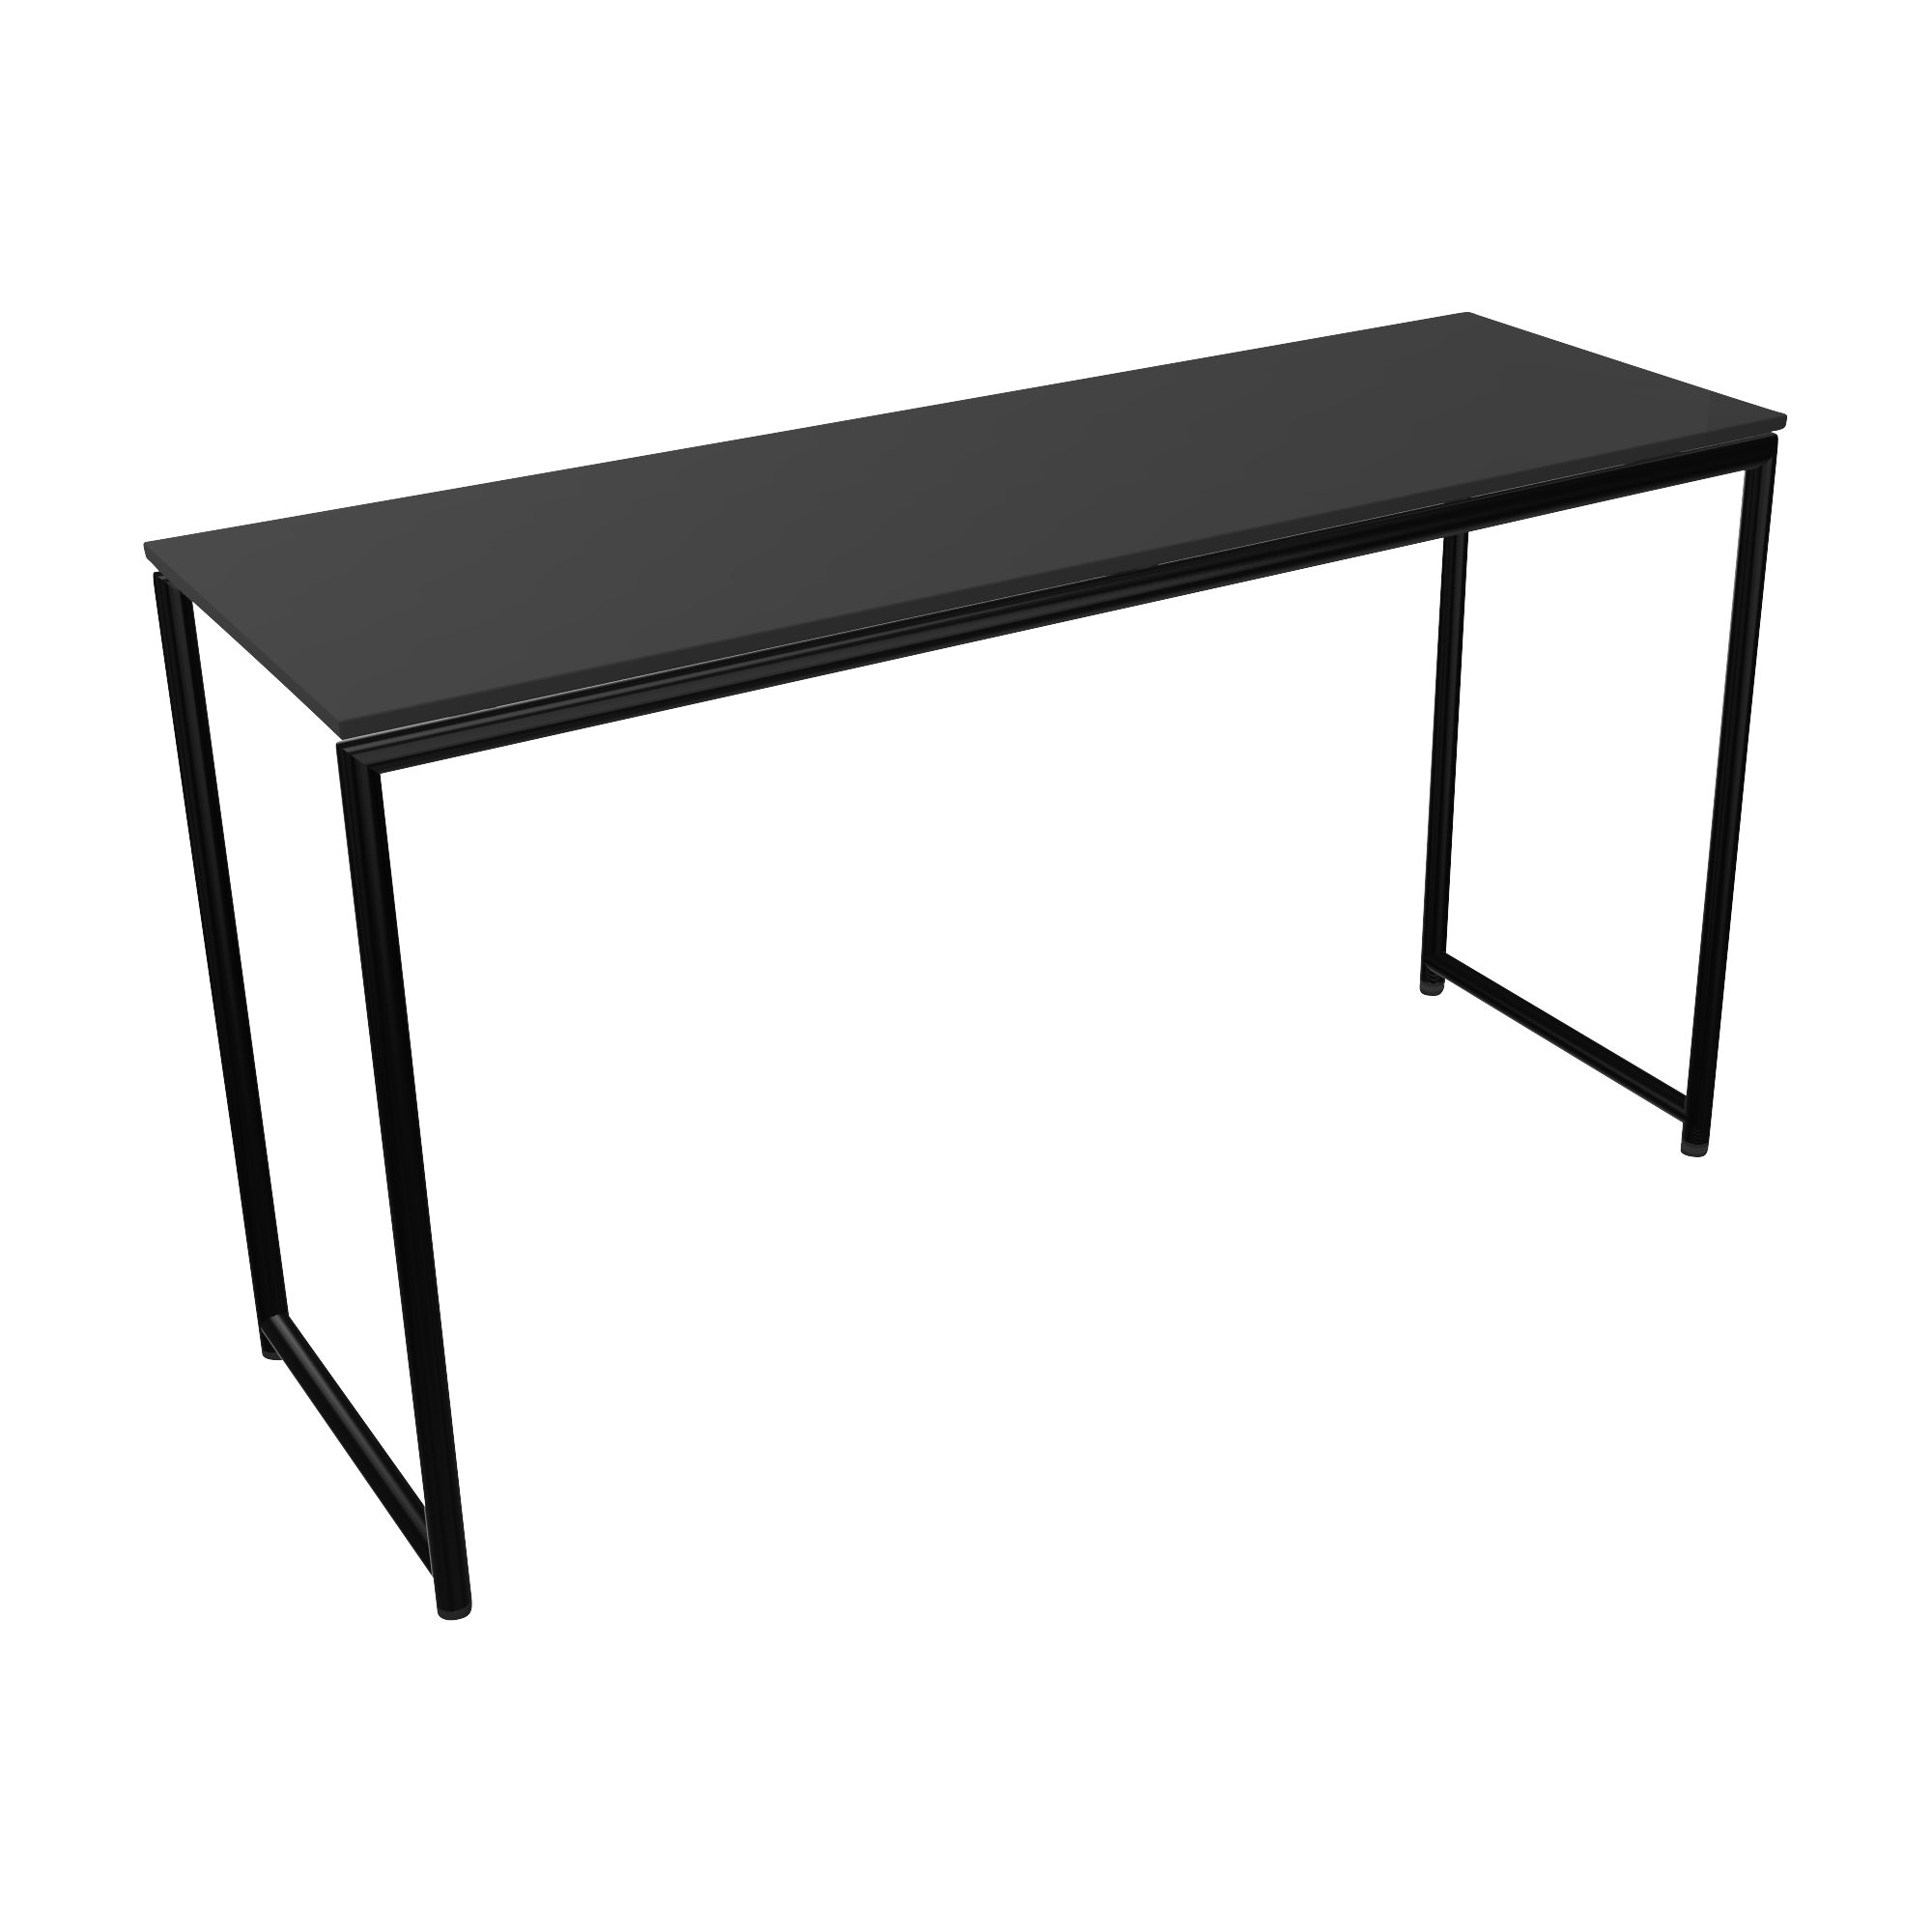 A counter height black desk with a metal frame and two legs